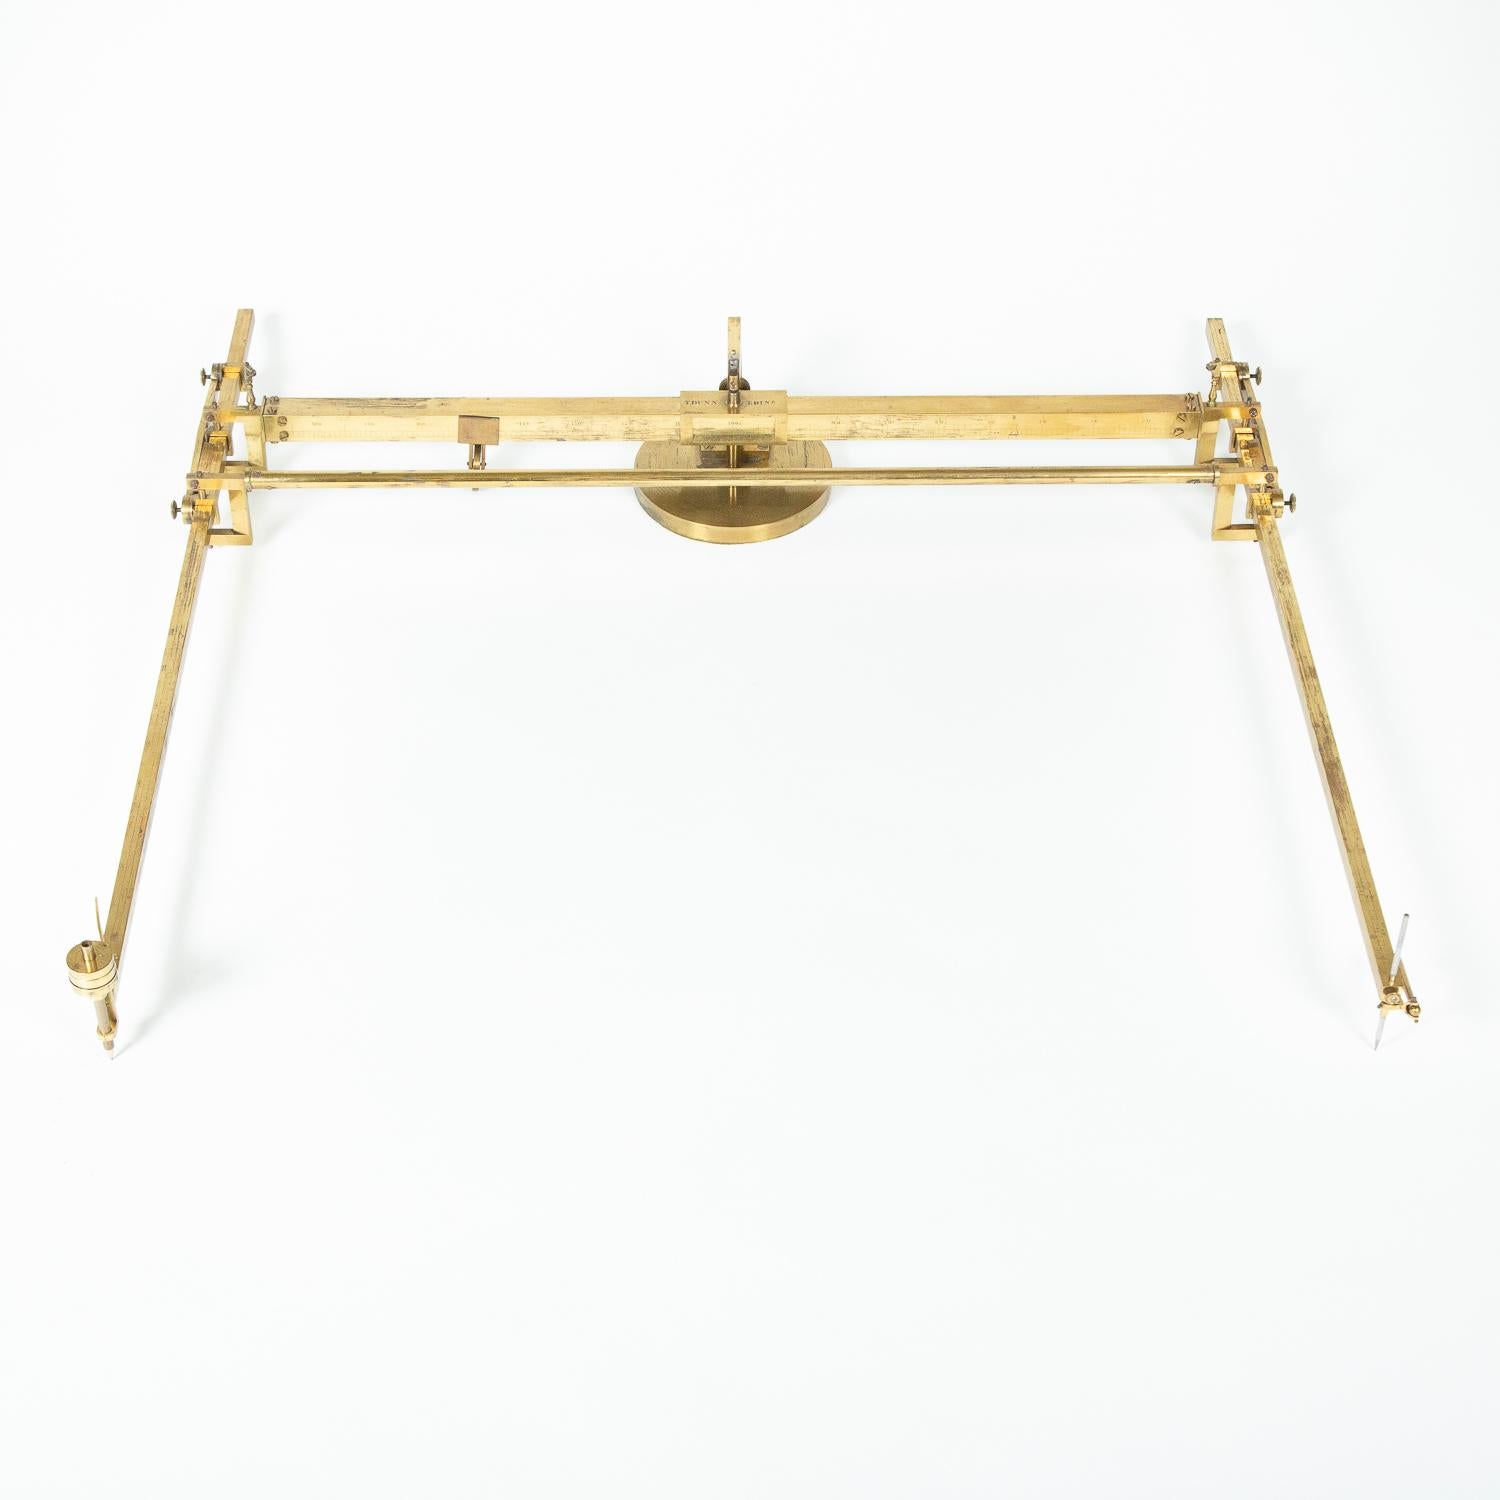 An oak cased brass pantograph by Thomas Dunn of 50 North Street, Edinburgh.

Interior of case has trade label: Thomas Dunn, optician, mathematical and philosophical instrument maker, 50 North Hanover Street, Edinburgh.

The interior also has a